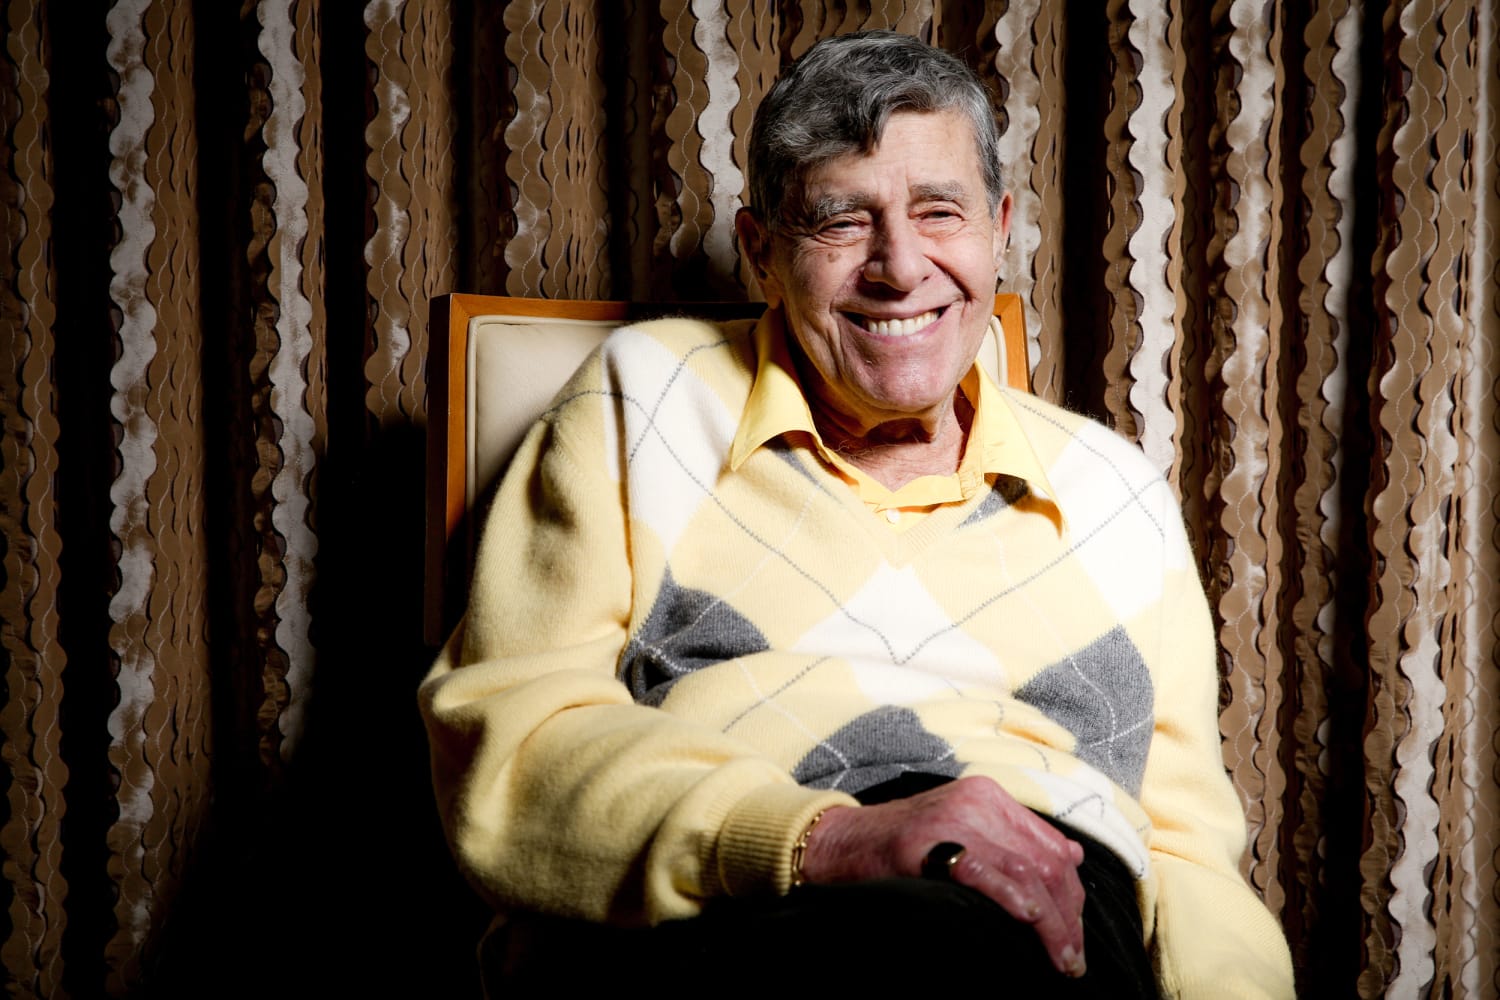 Jerry Lewis, Facts, Biography, Telethon, & Movies